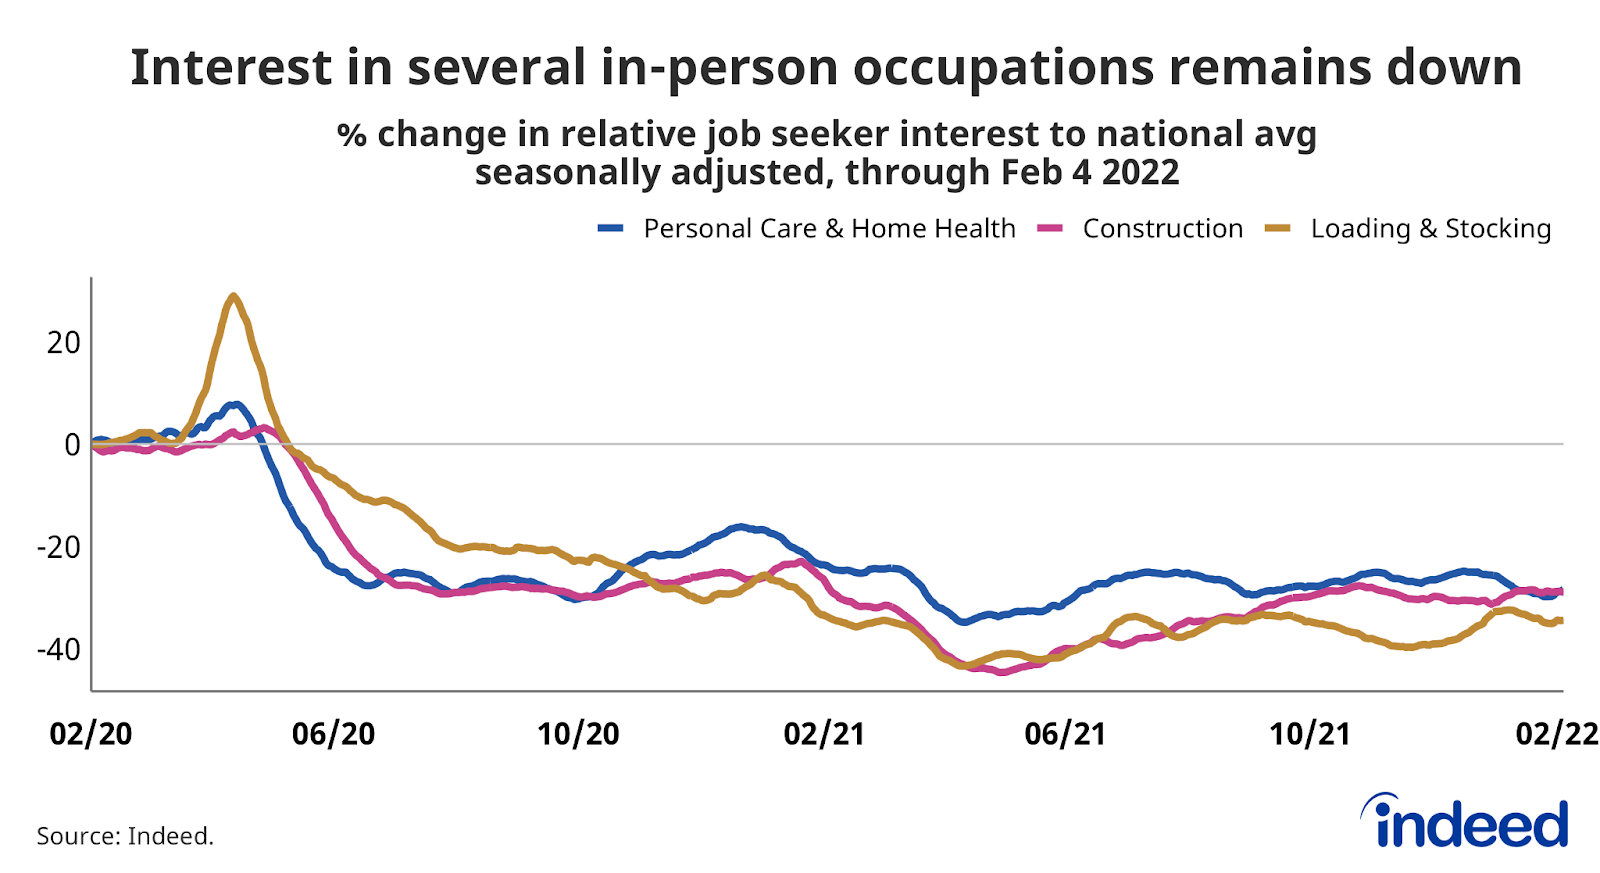 Line graph titled “Interest in several in-person occupations remains down.”